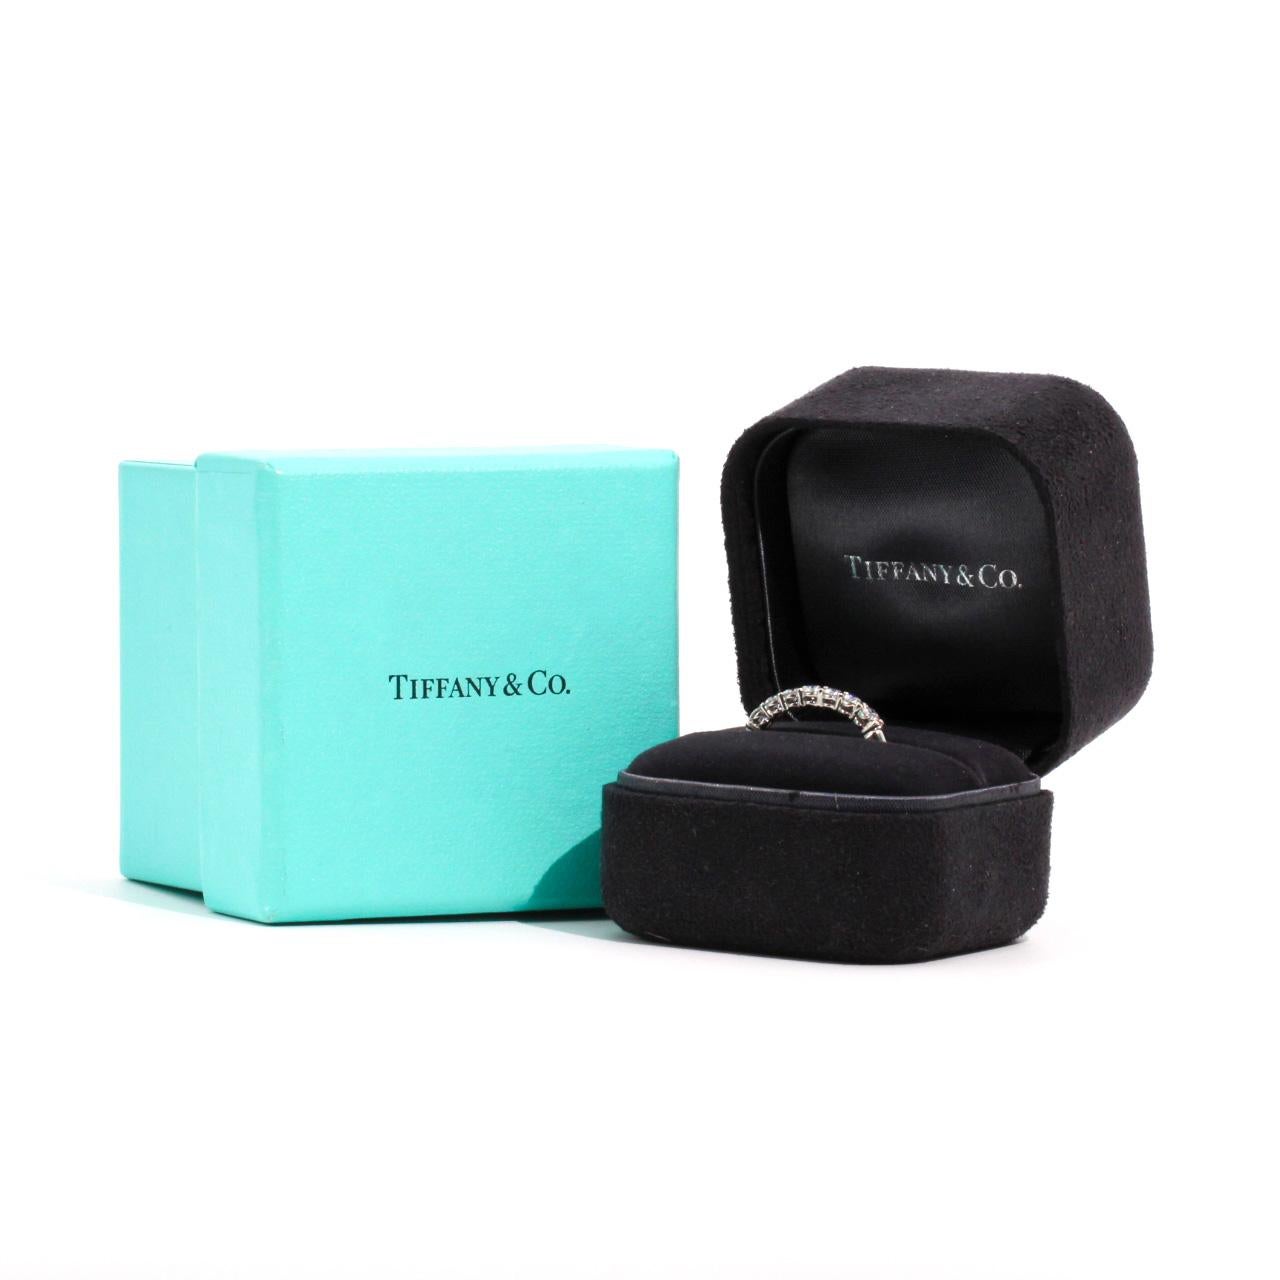 Round Cut Tiffany & Co. 0.63 Carat Diamond and Platinum Embrace Ring with Original Boxes